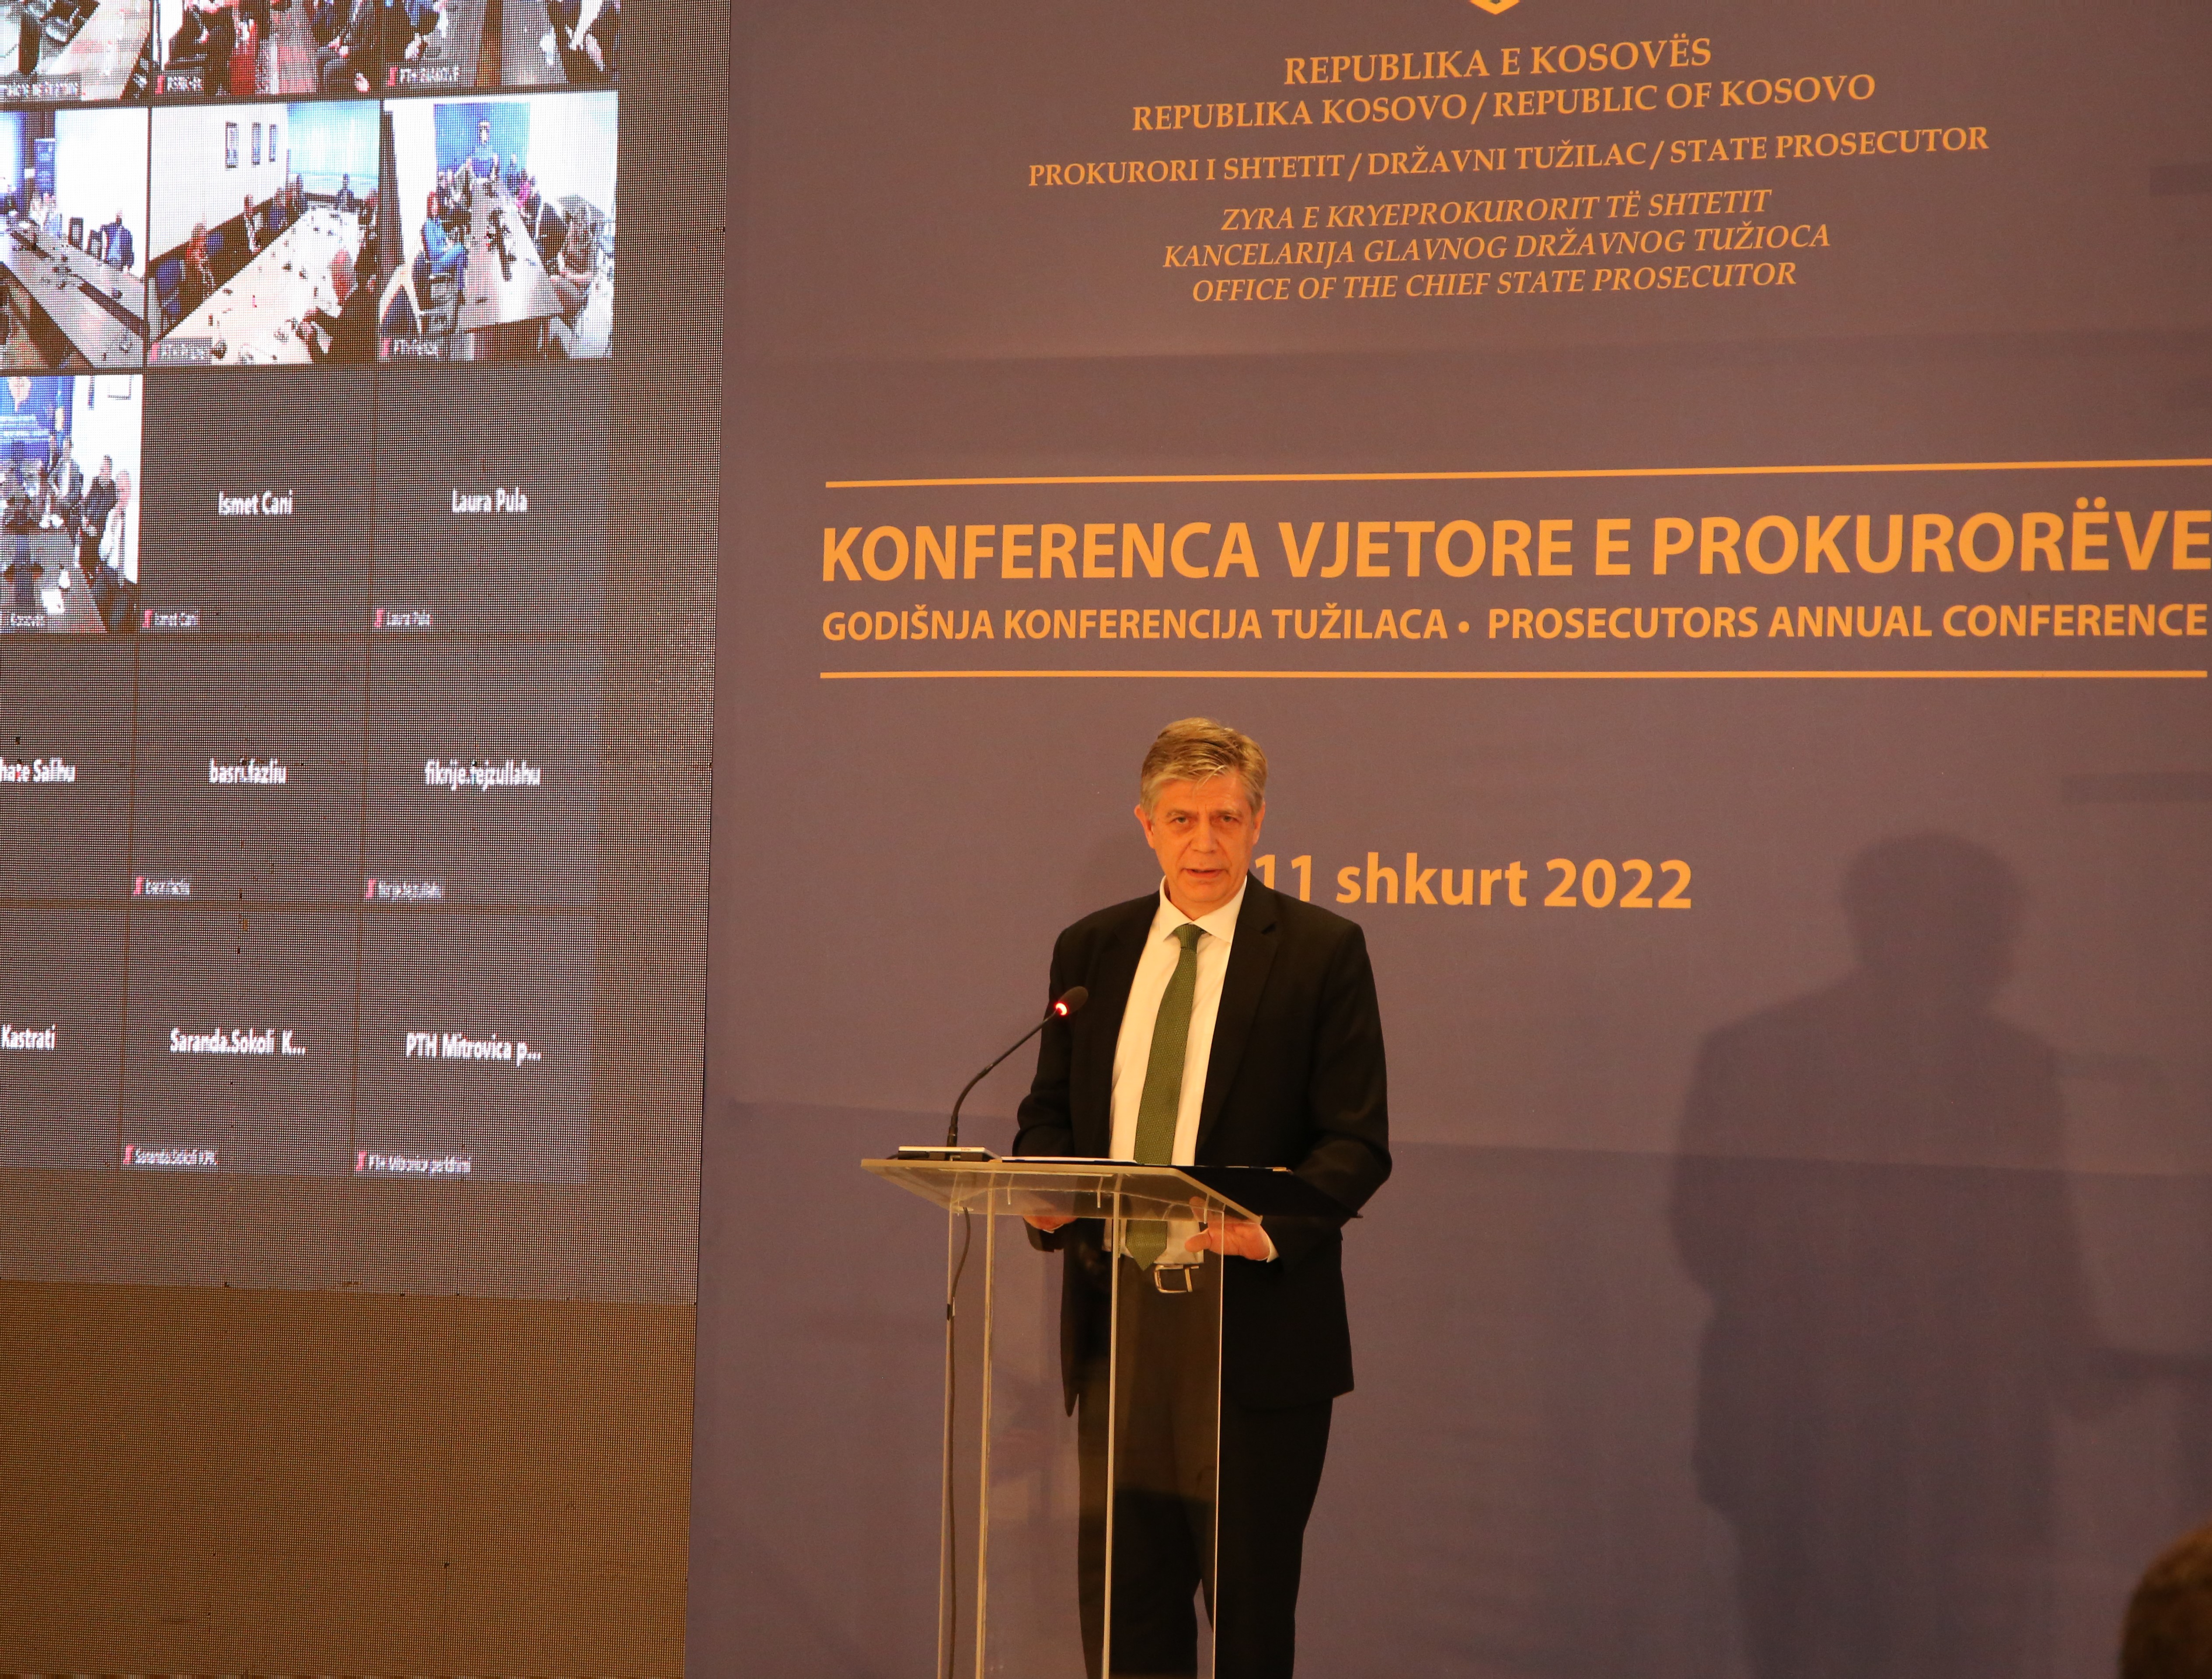 Head of Mission’s Speech at the 2022 Annual Conference of Prosecutors on 11 February 2022 